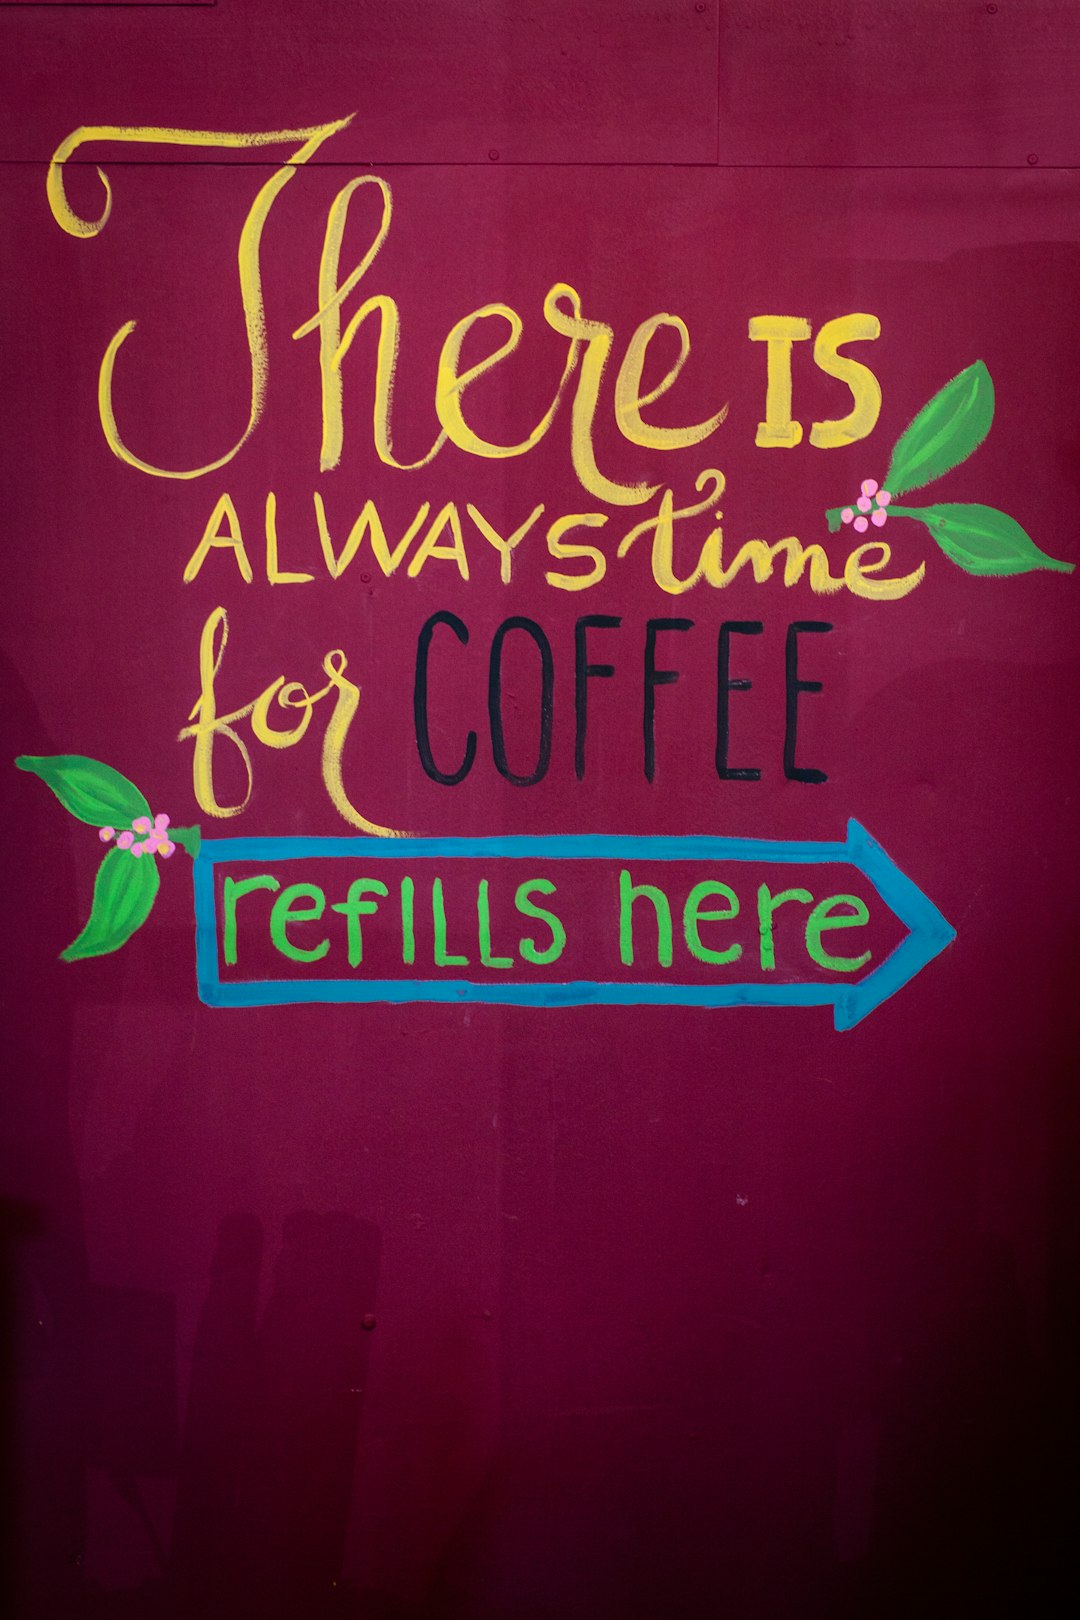 red there is always time for coffee refills here-printed textile